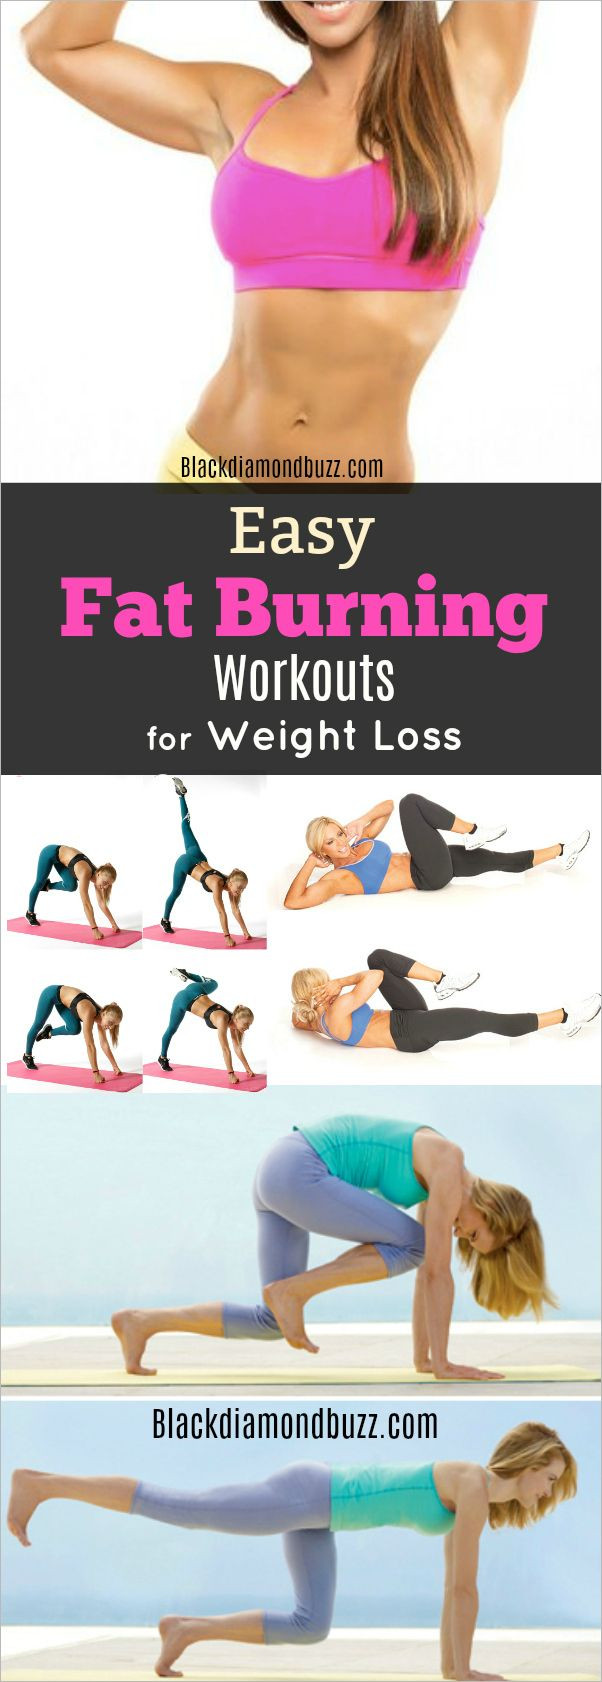 Fast Fat Burning Workout
 12 Best Fat Burning Workouts For Fast Weight Loss